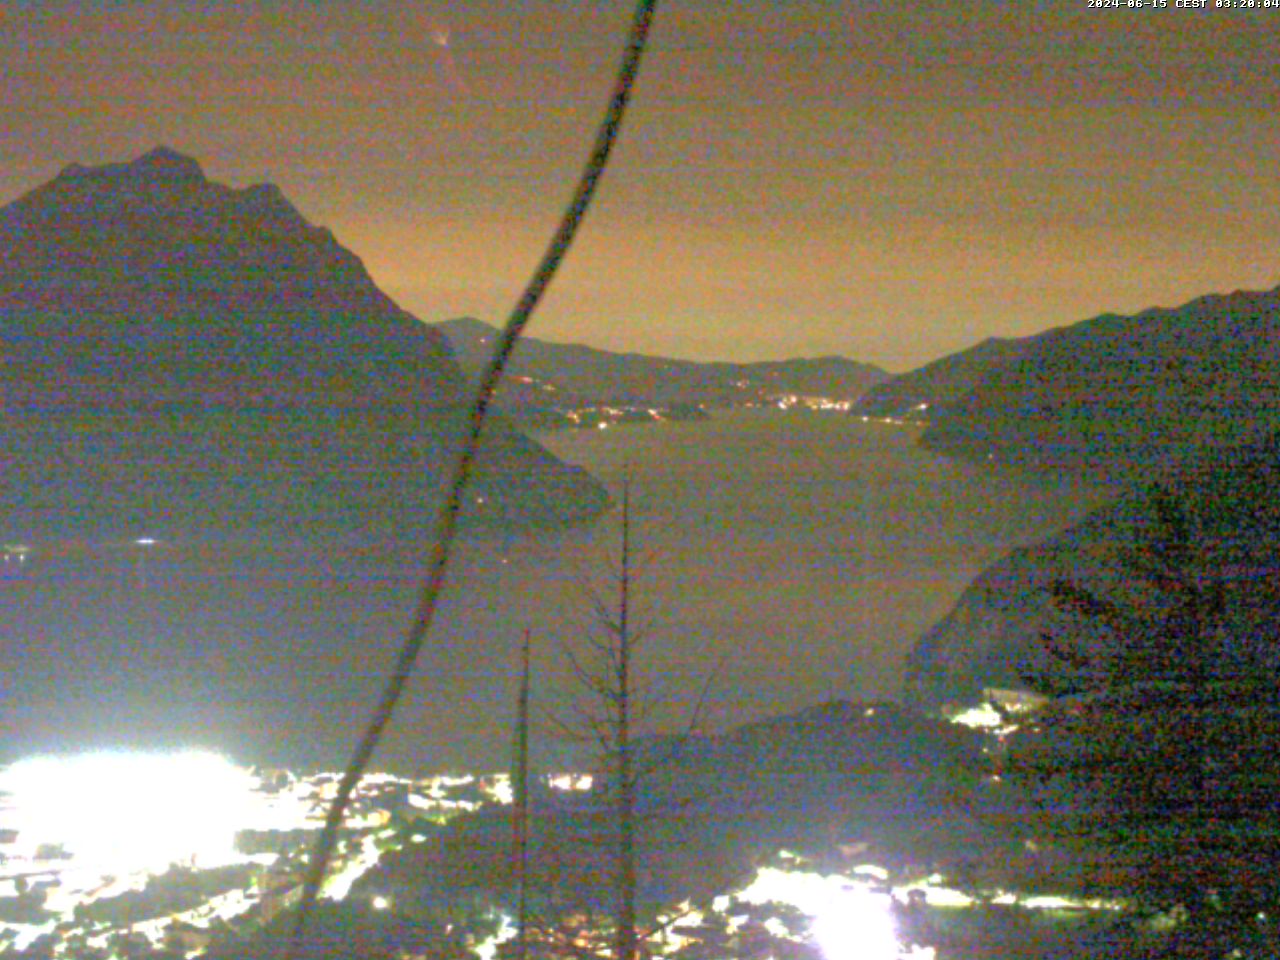 Lovere (Lac d'Iseo) Me. 03:29